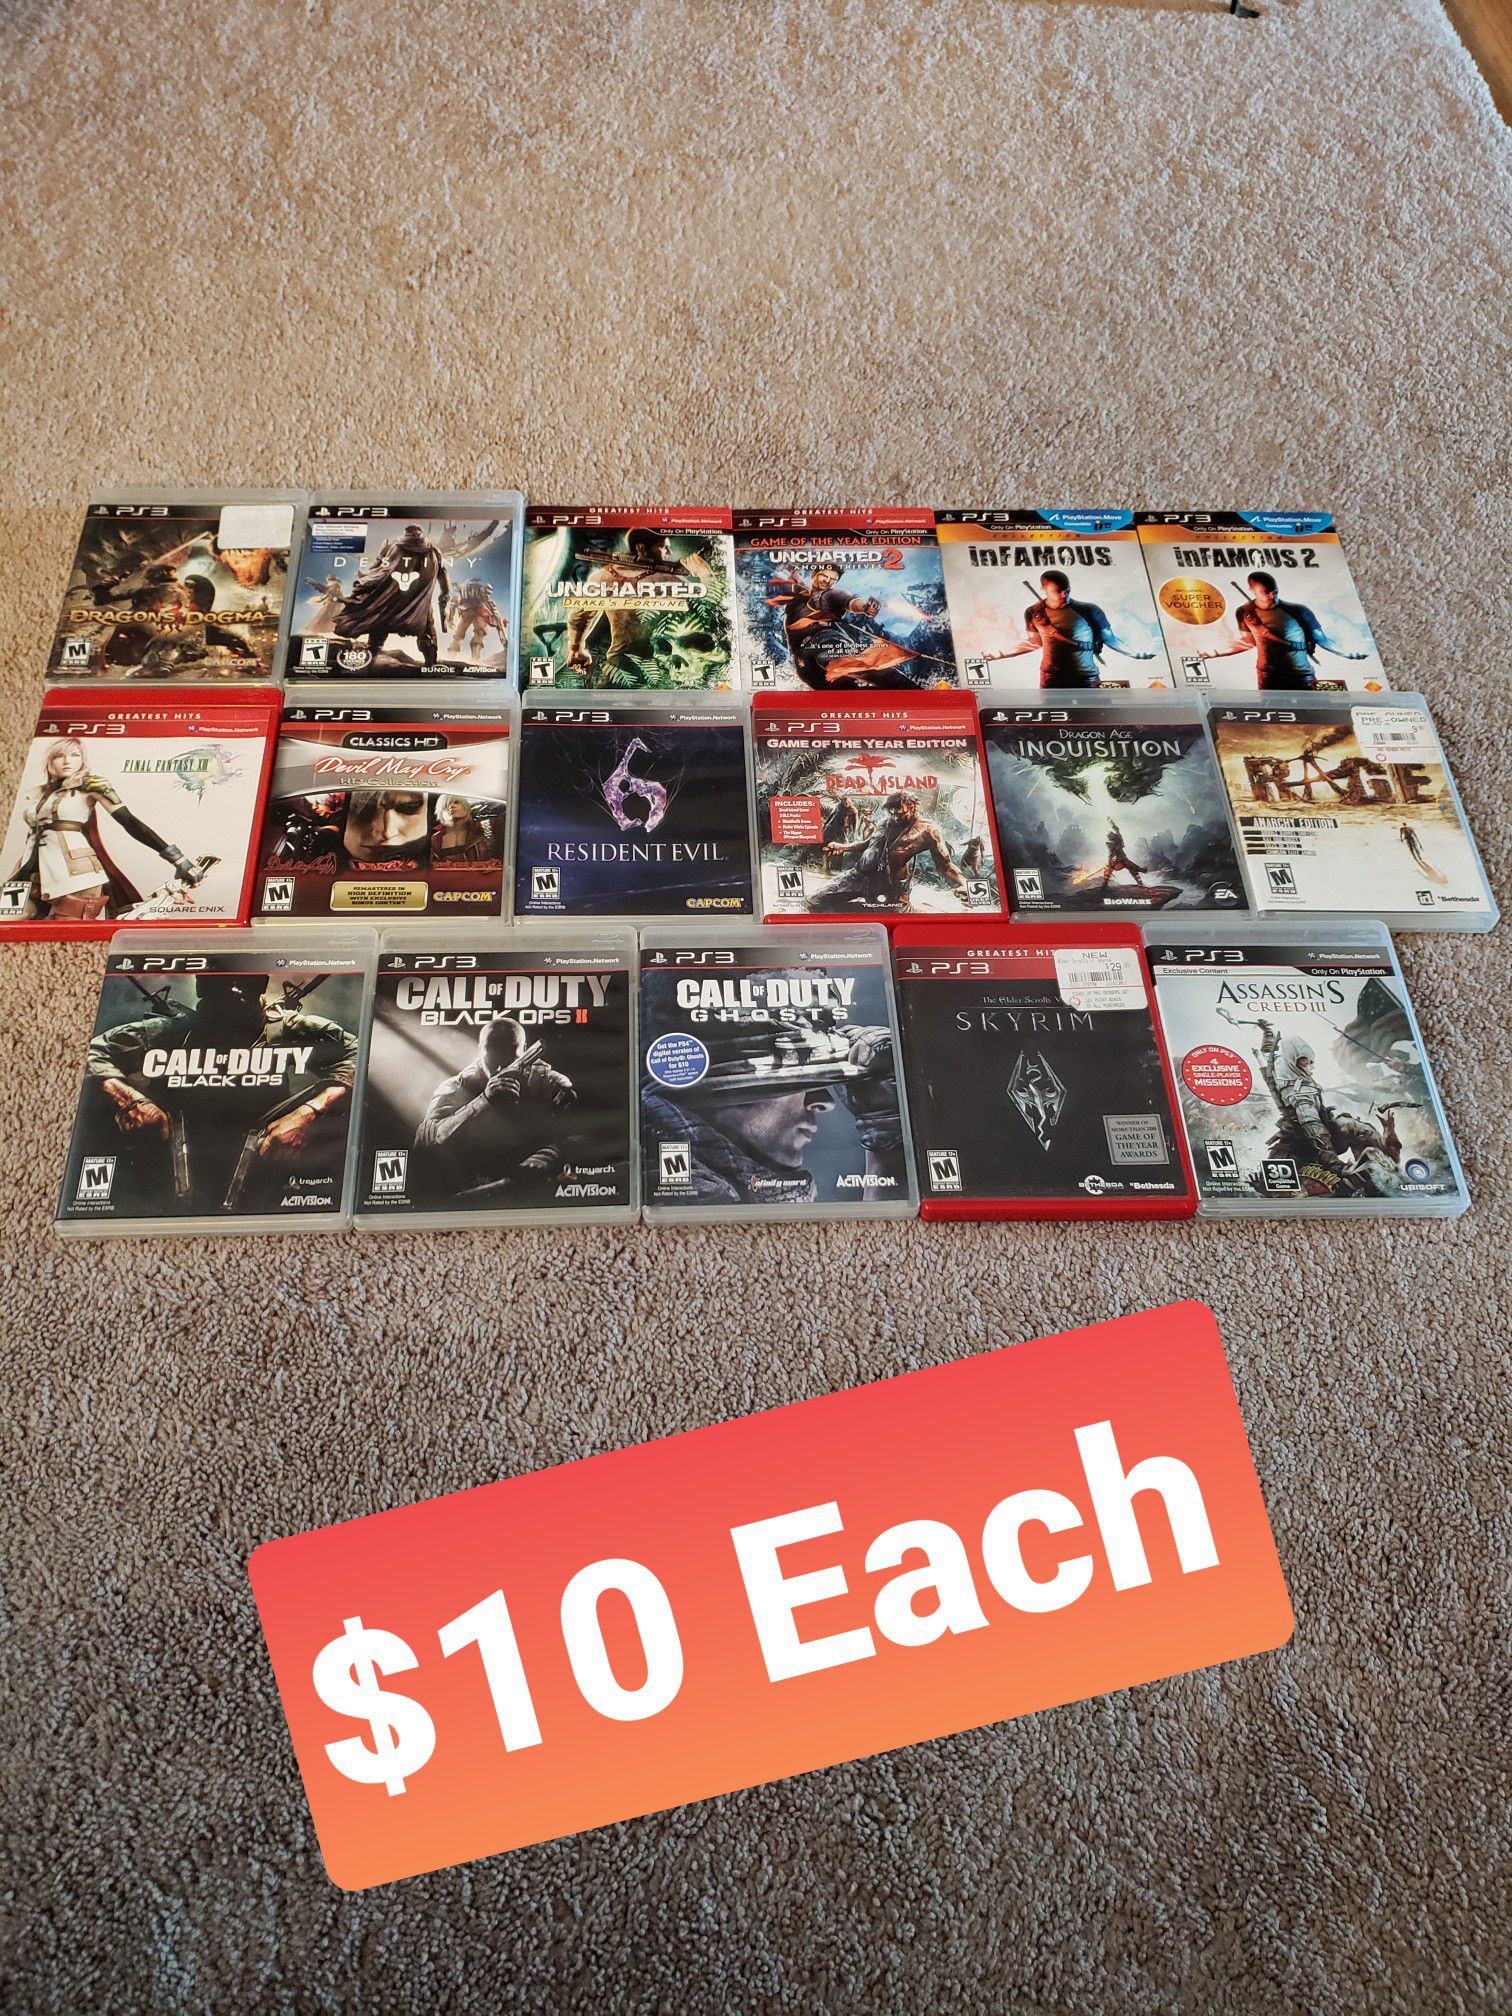 Ps3 Games $10 A Peice Or $170 For All The Games